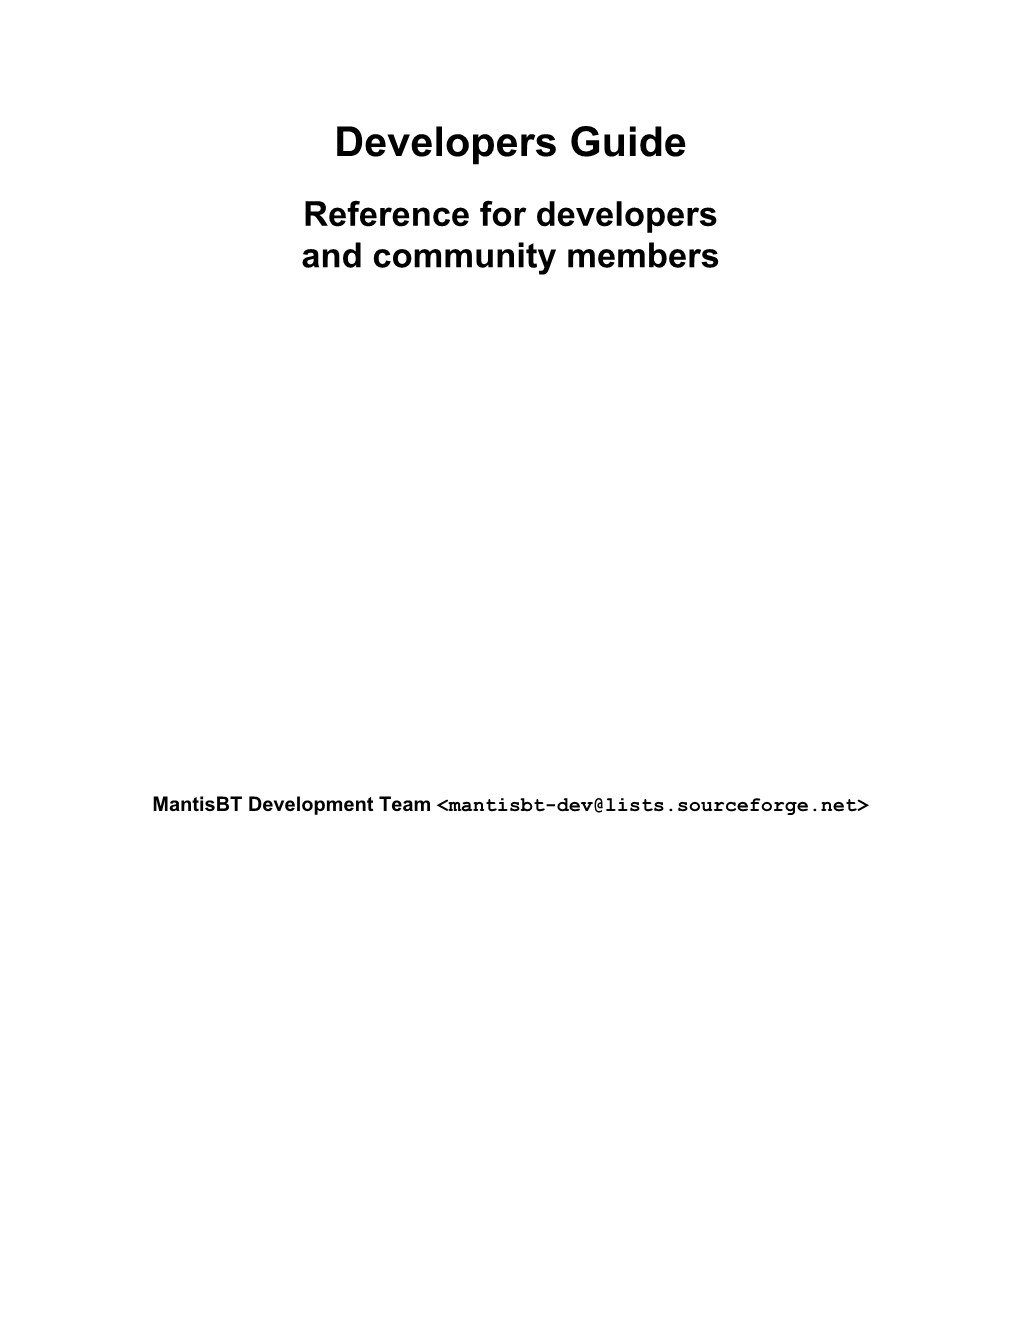 Developers Guide Reference for Developers and Community Members